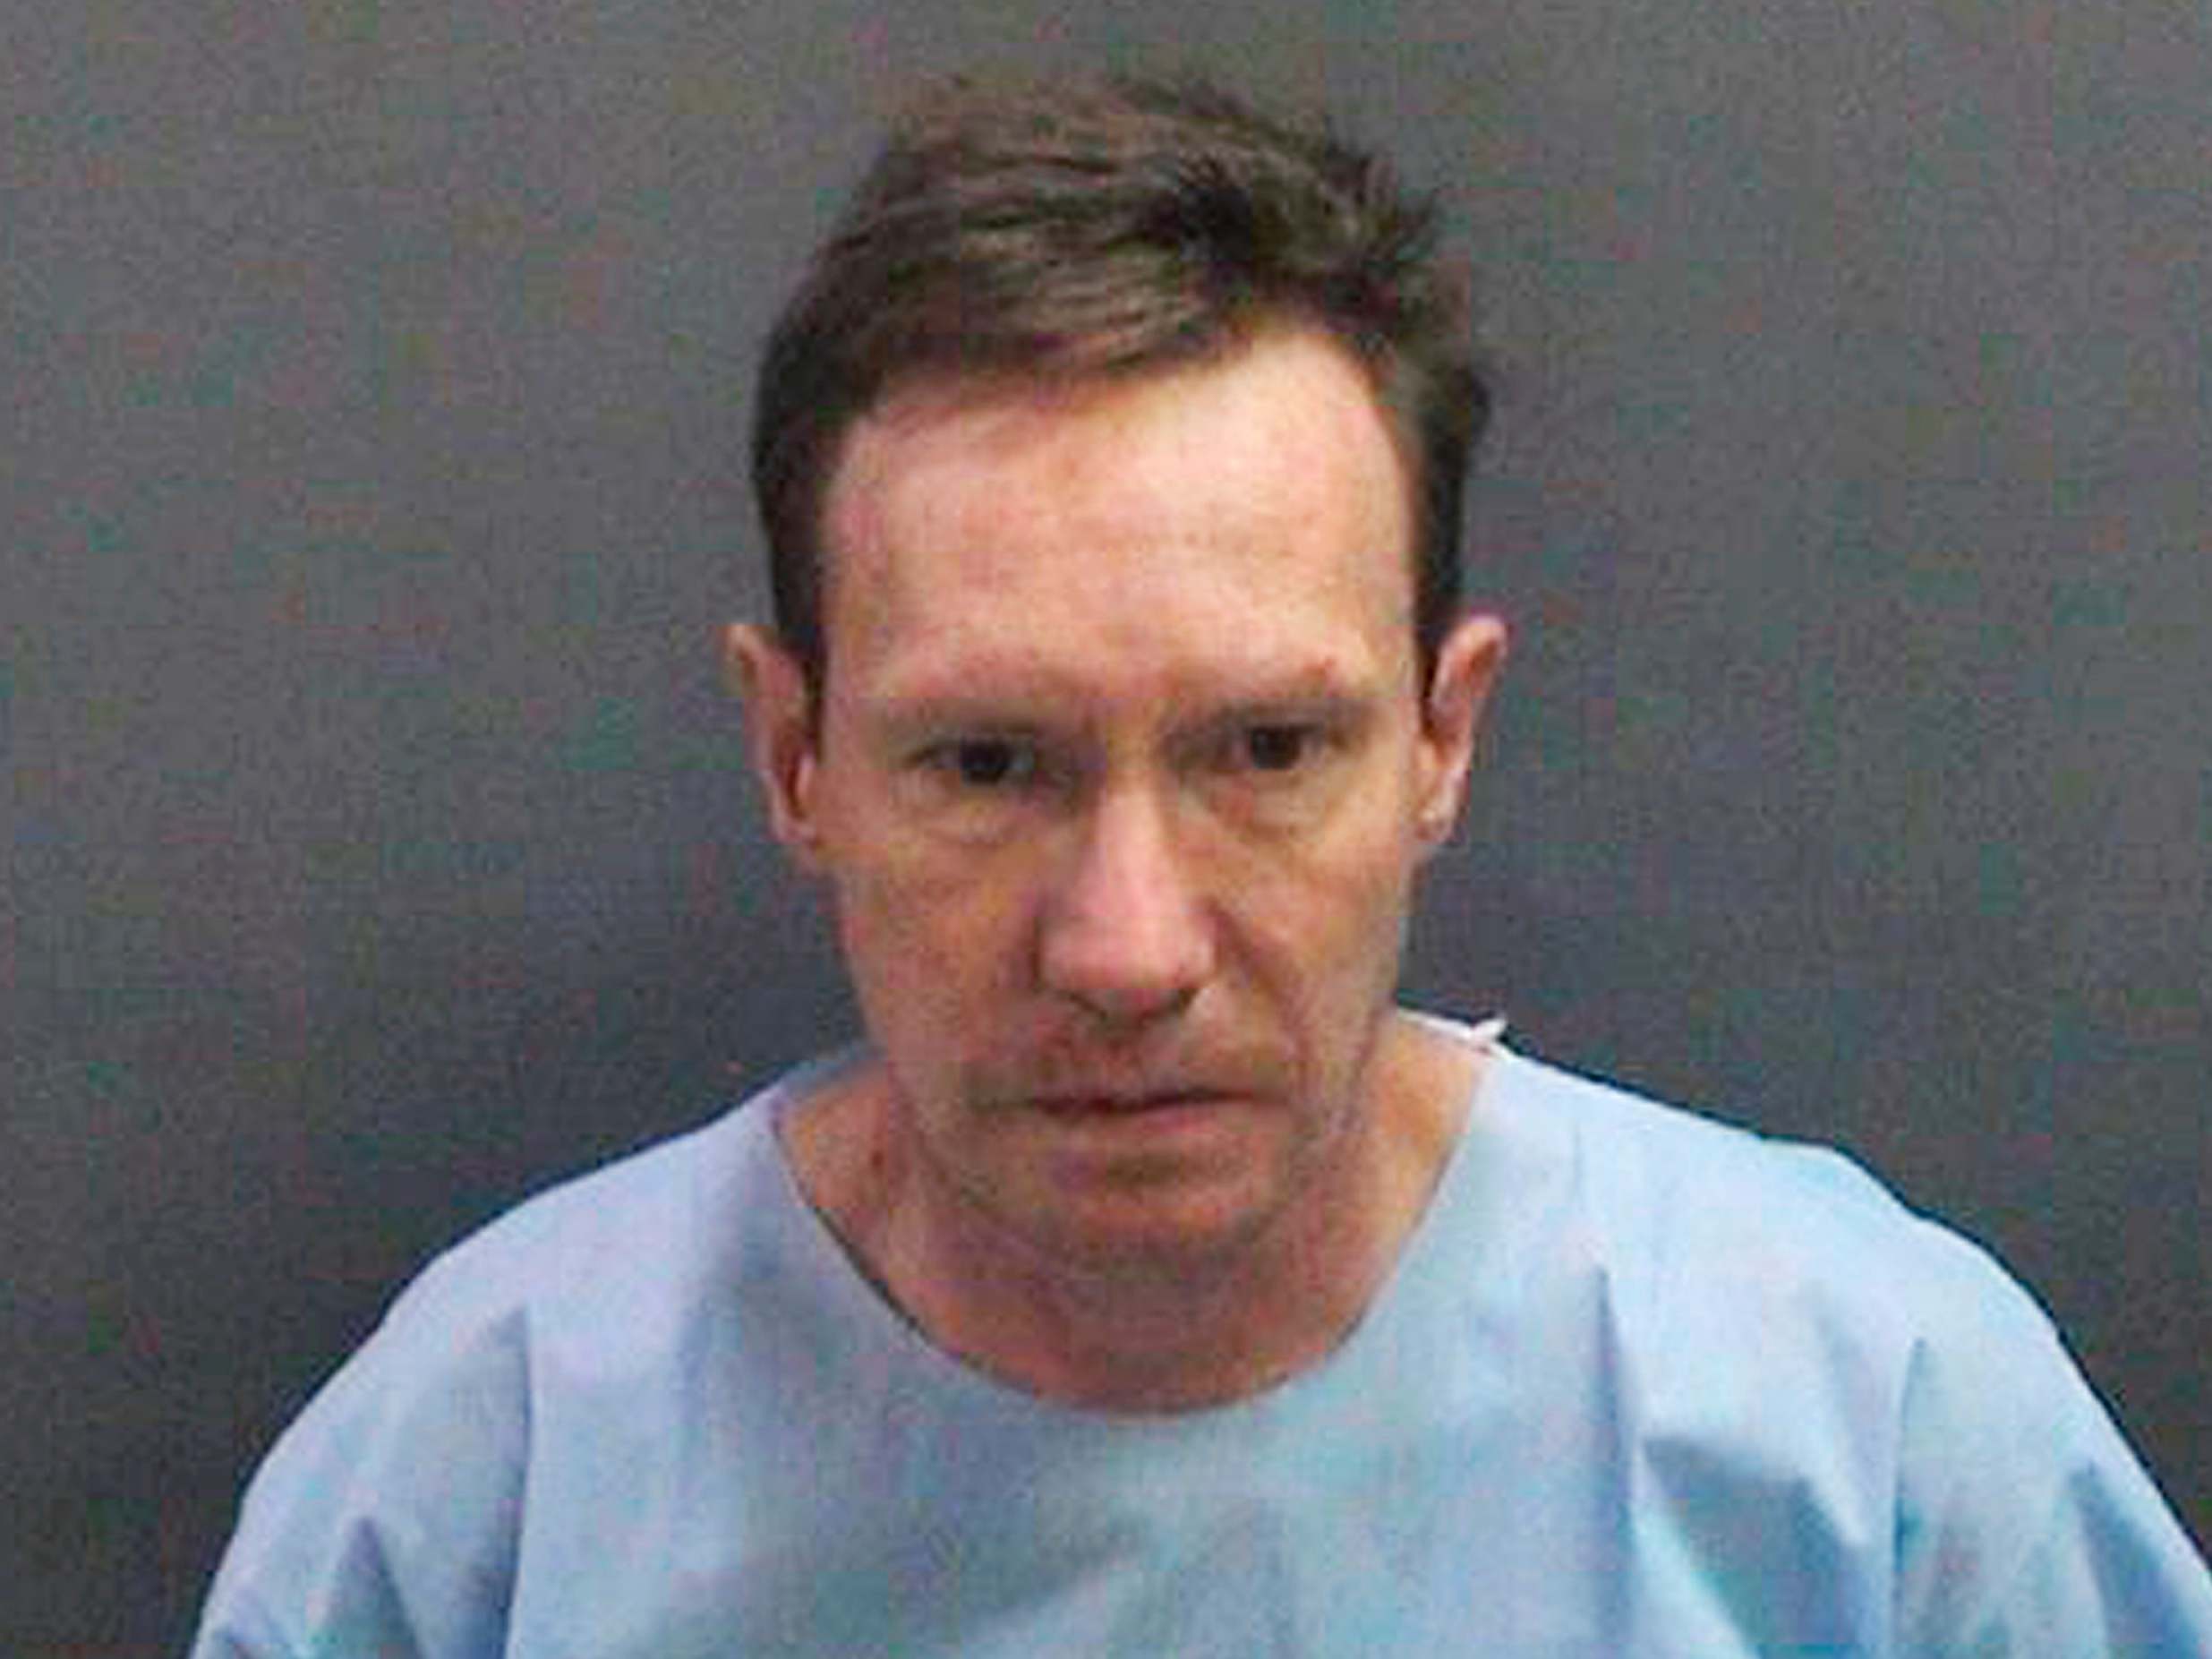 Peter Chadwick was captured on Sunday in Mexico